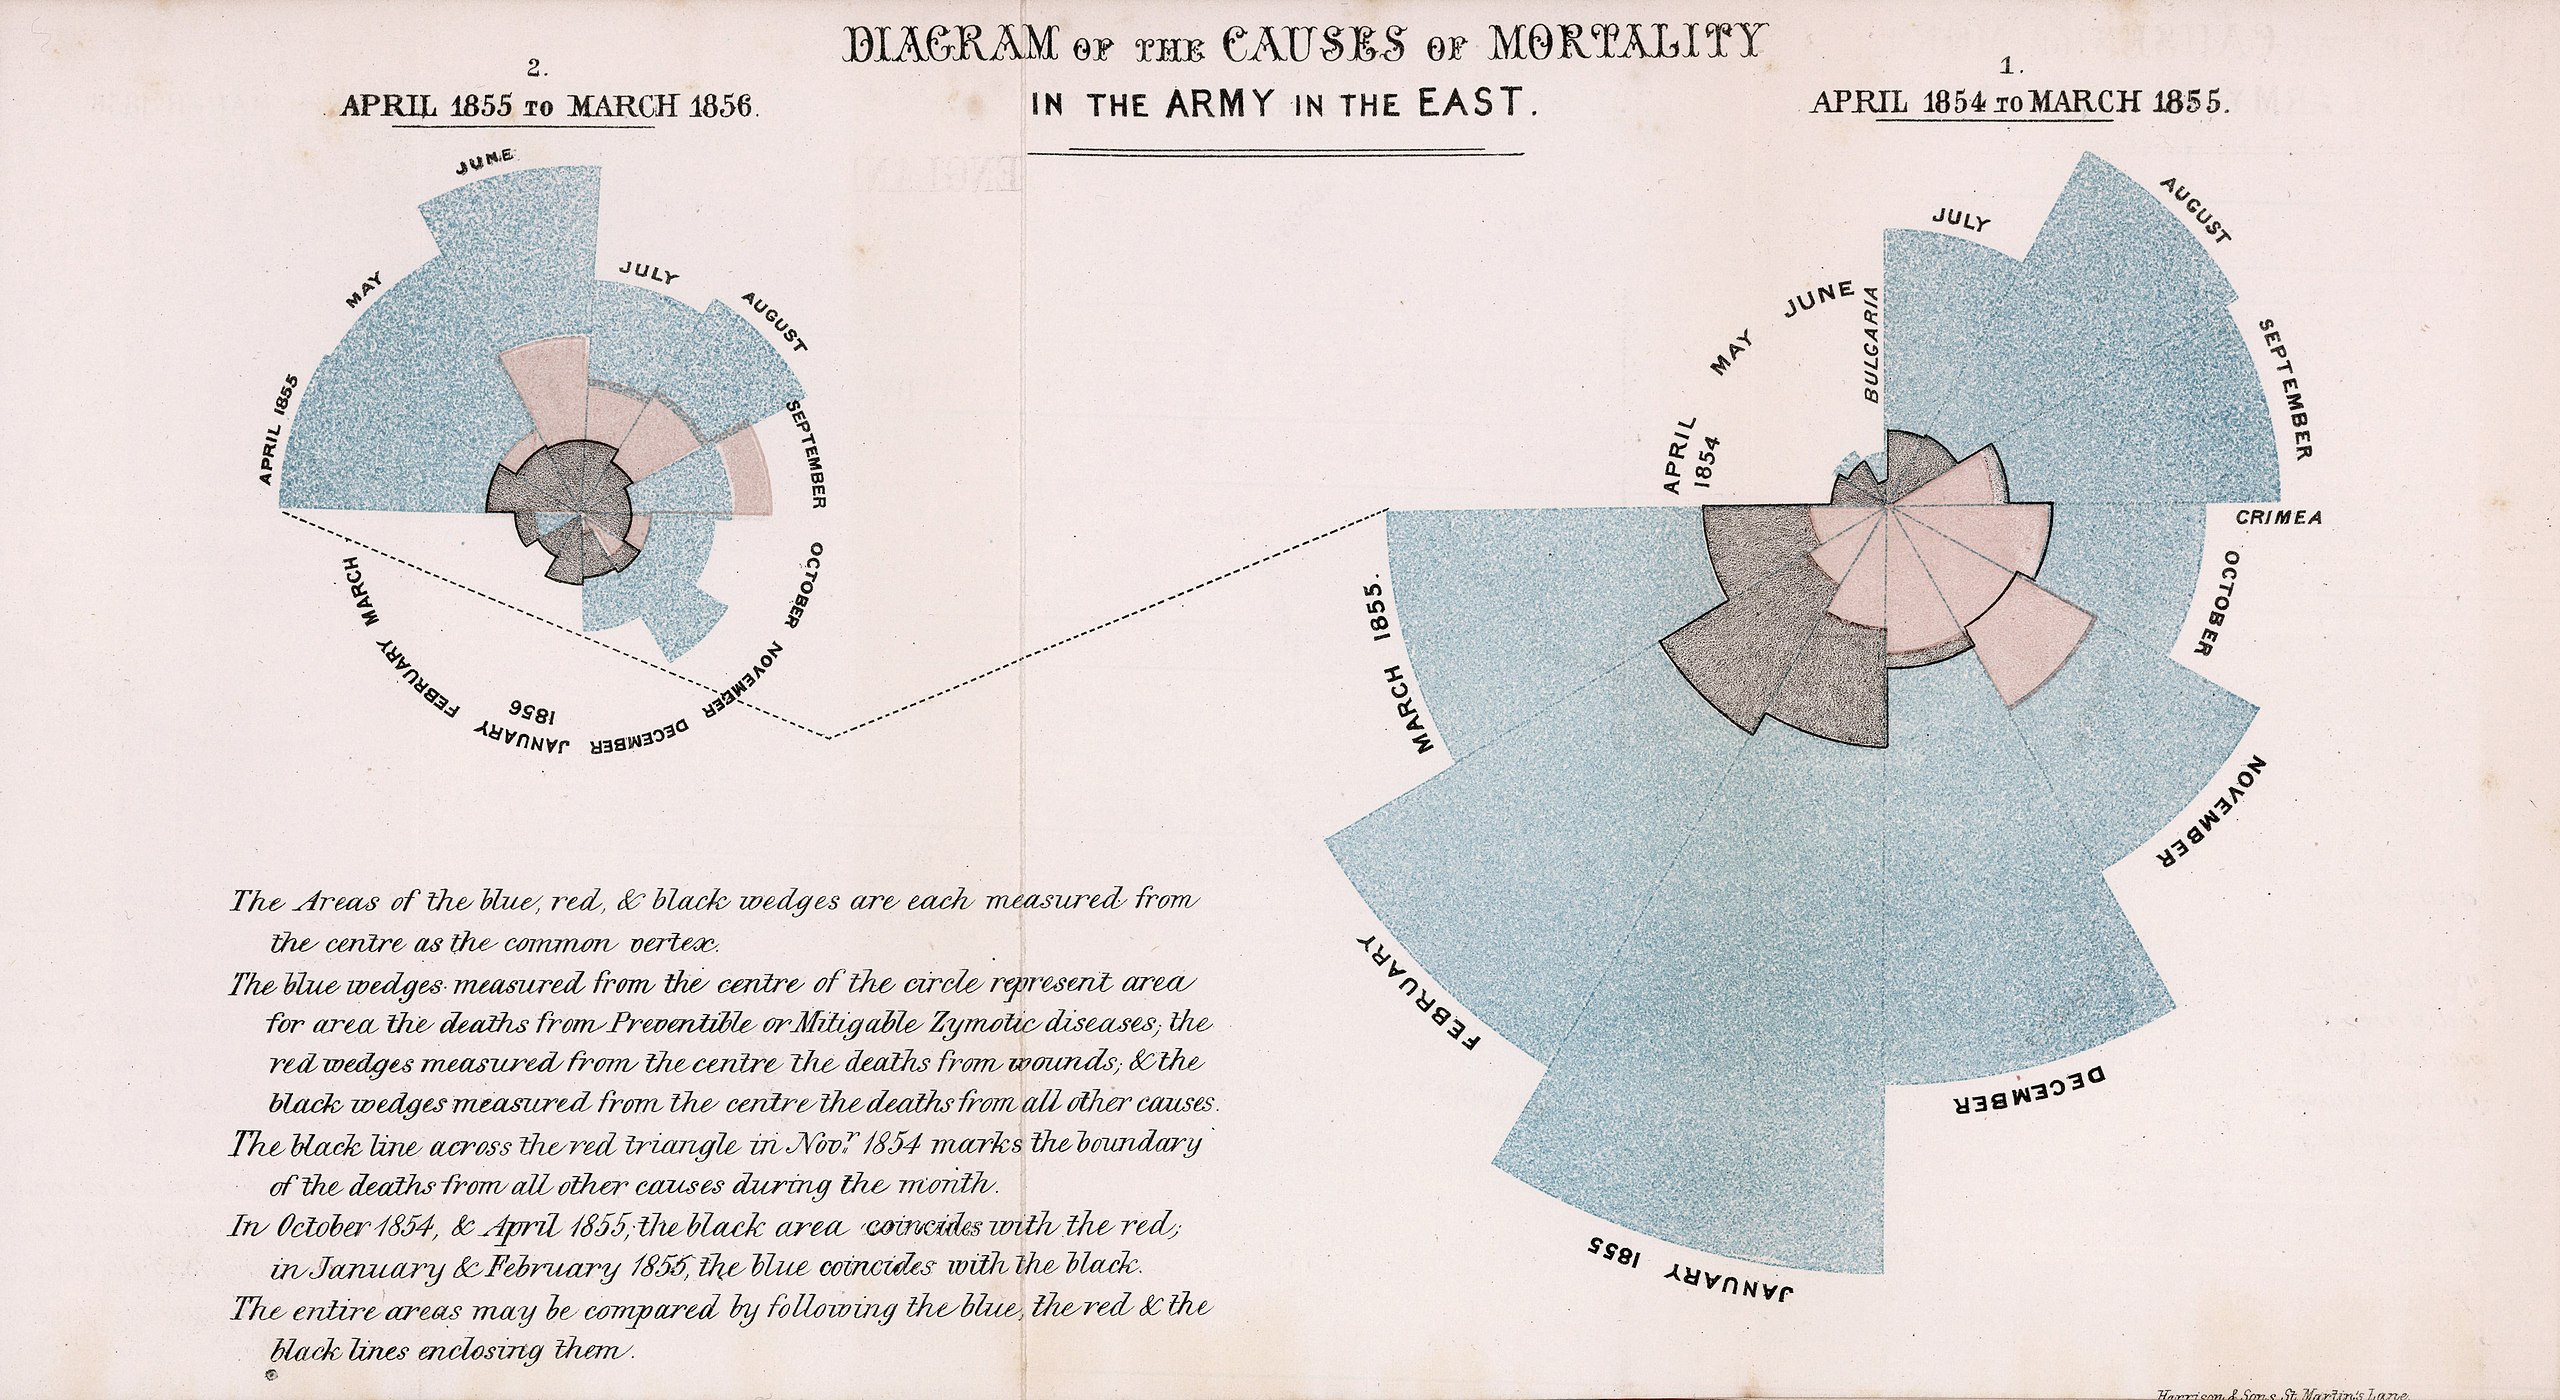 A diagram titled, “Diagram of the Causes of Mortality in the Army in the East.” Two coxcomb charts depict preventable deaths, deaths from wounds, and deaths from other causes, each represented in blue, red, or black, respectively for a year. The chart on the left, marking months between April 1855 and March 1856, is half the size of the chart on the right, which shows Nightingale’s different categorizations of deaths from April of 1854 to March 1855. 